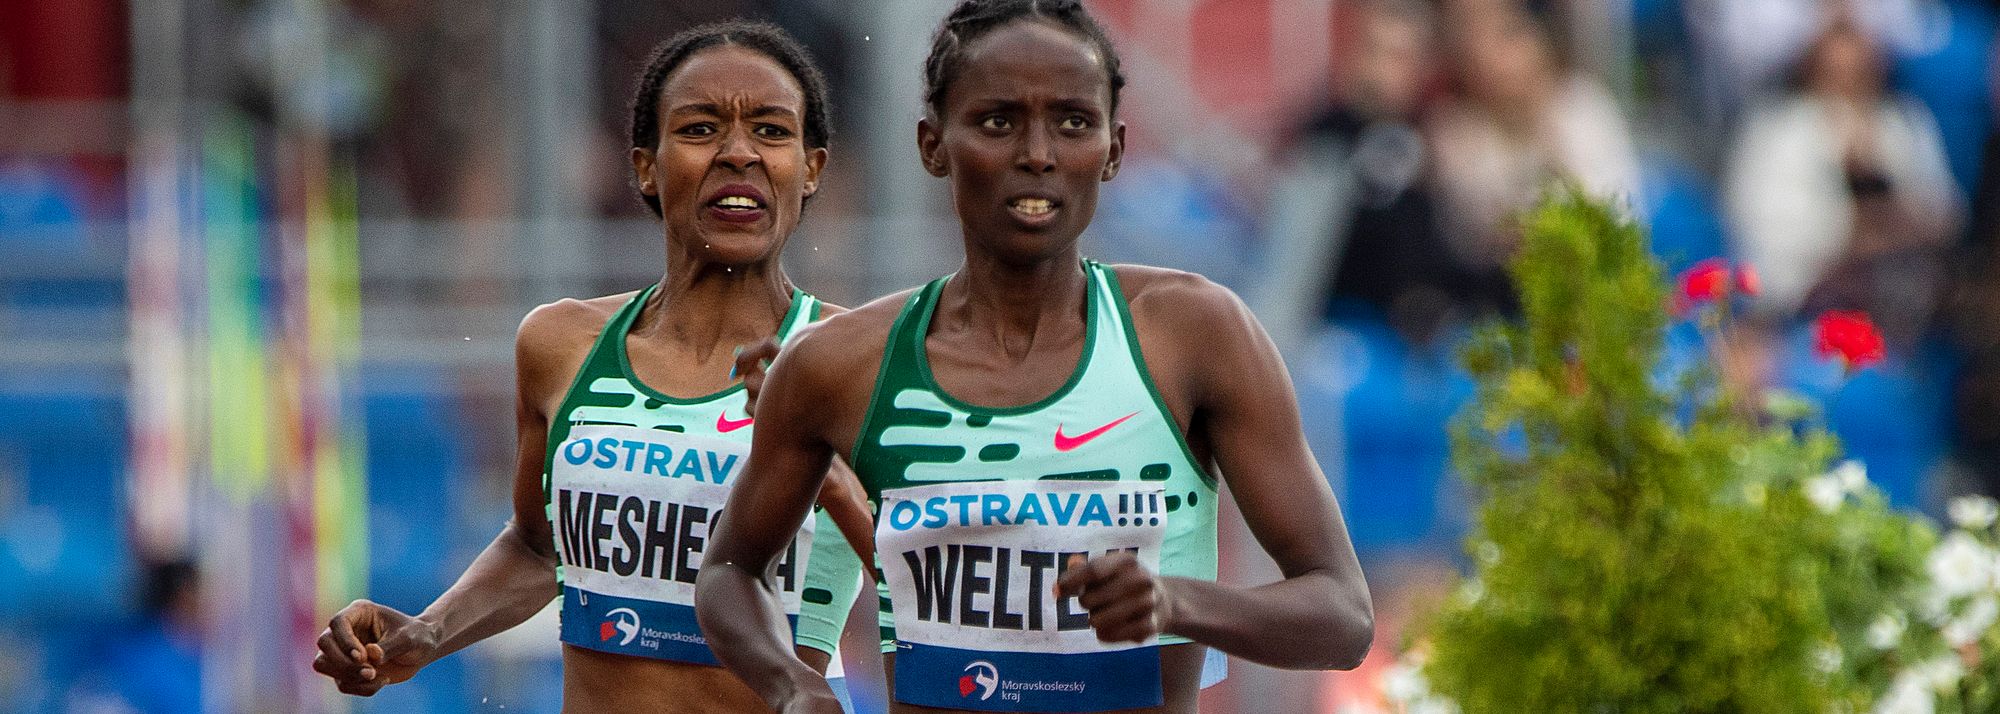 Diribe Welteji, Freweyni Hailu and Beatrice Chepkoech will form part of a strong women’s 1500m field when the ORLEN Copernicus Cup takes place in Torun